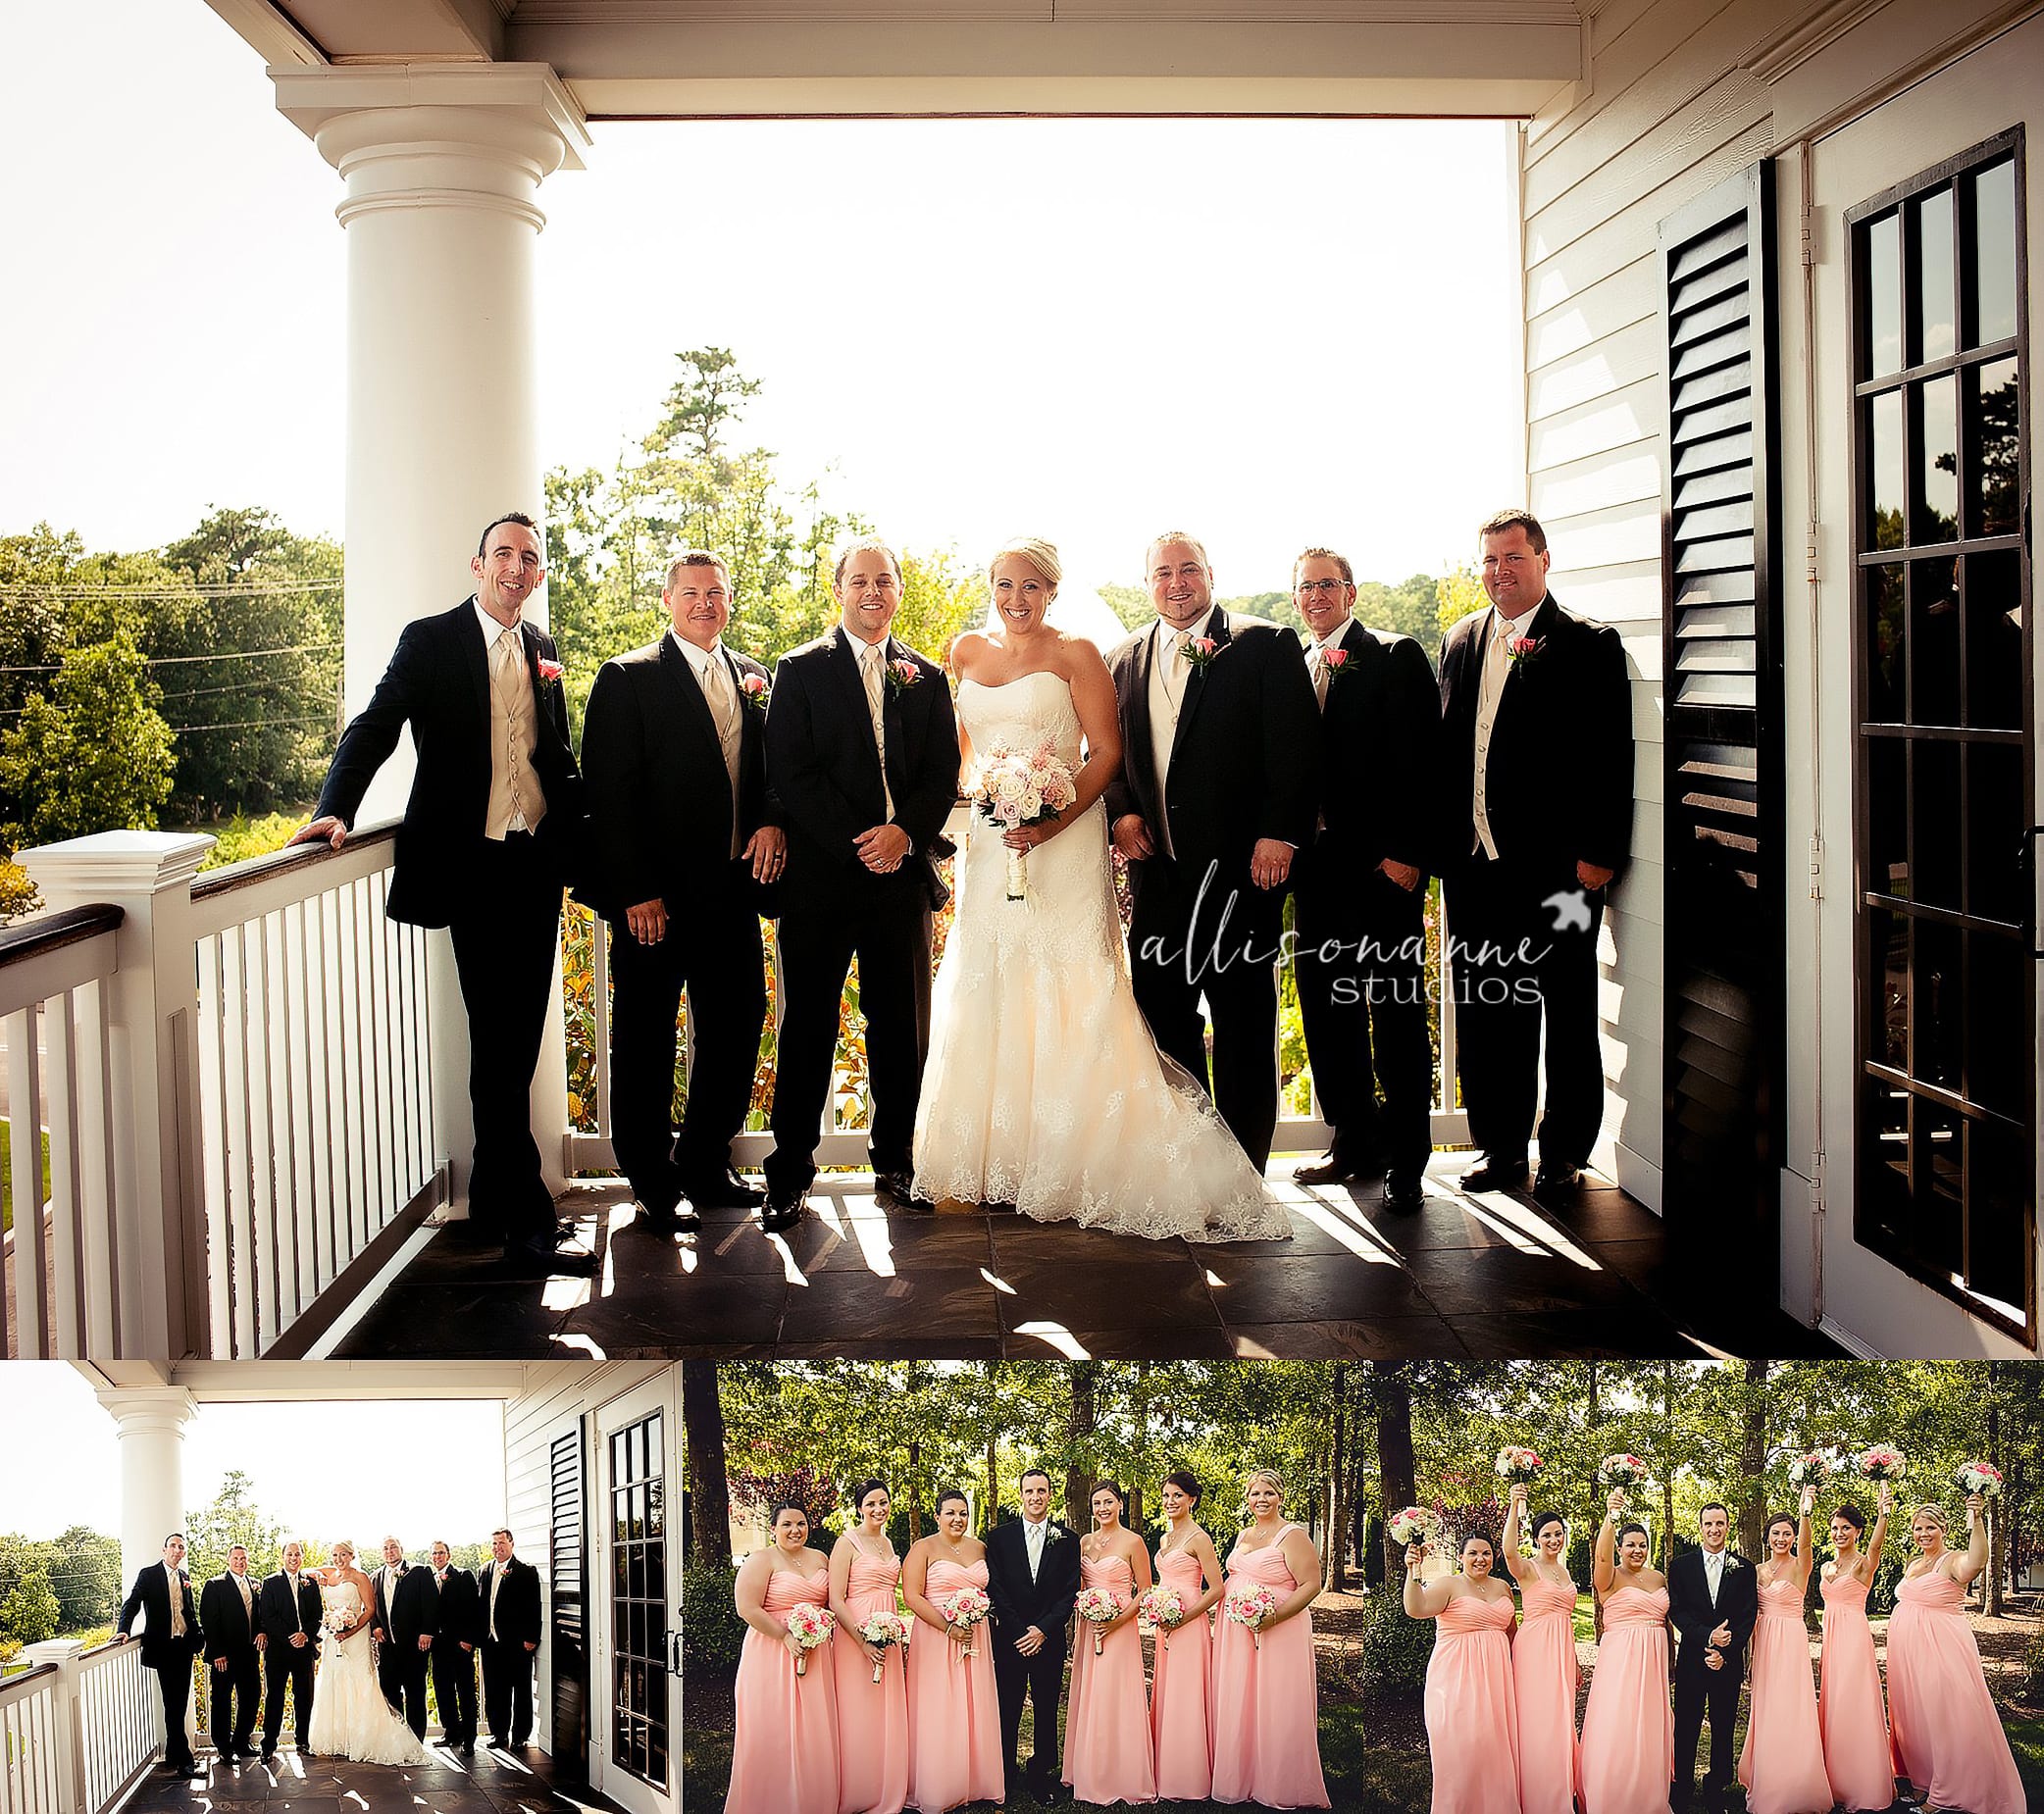 wedding, Murphy Farms, Farmer, Chevy Trucks, The Carriage House, love, AllisonAnne Studios, Best Photographer in South Jersey, Hammonton, The Big Day, Pink Bridesmaid Dresses